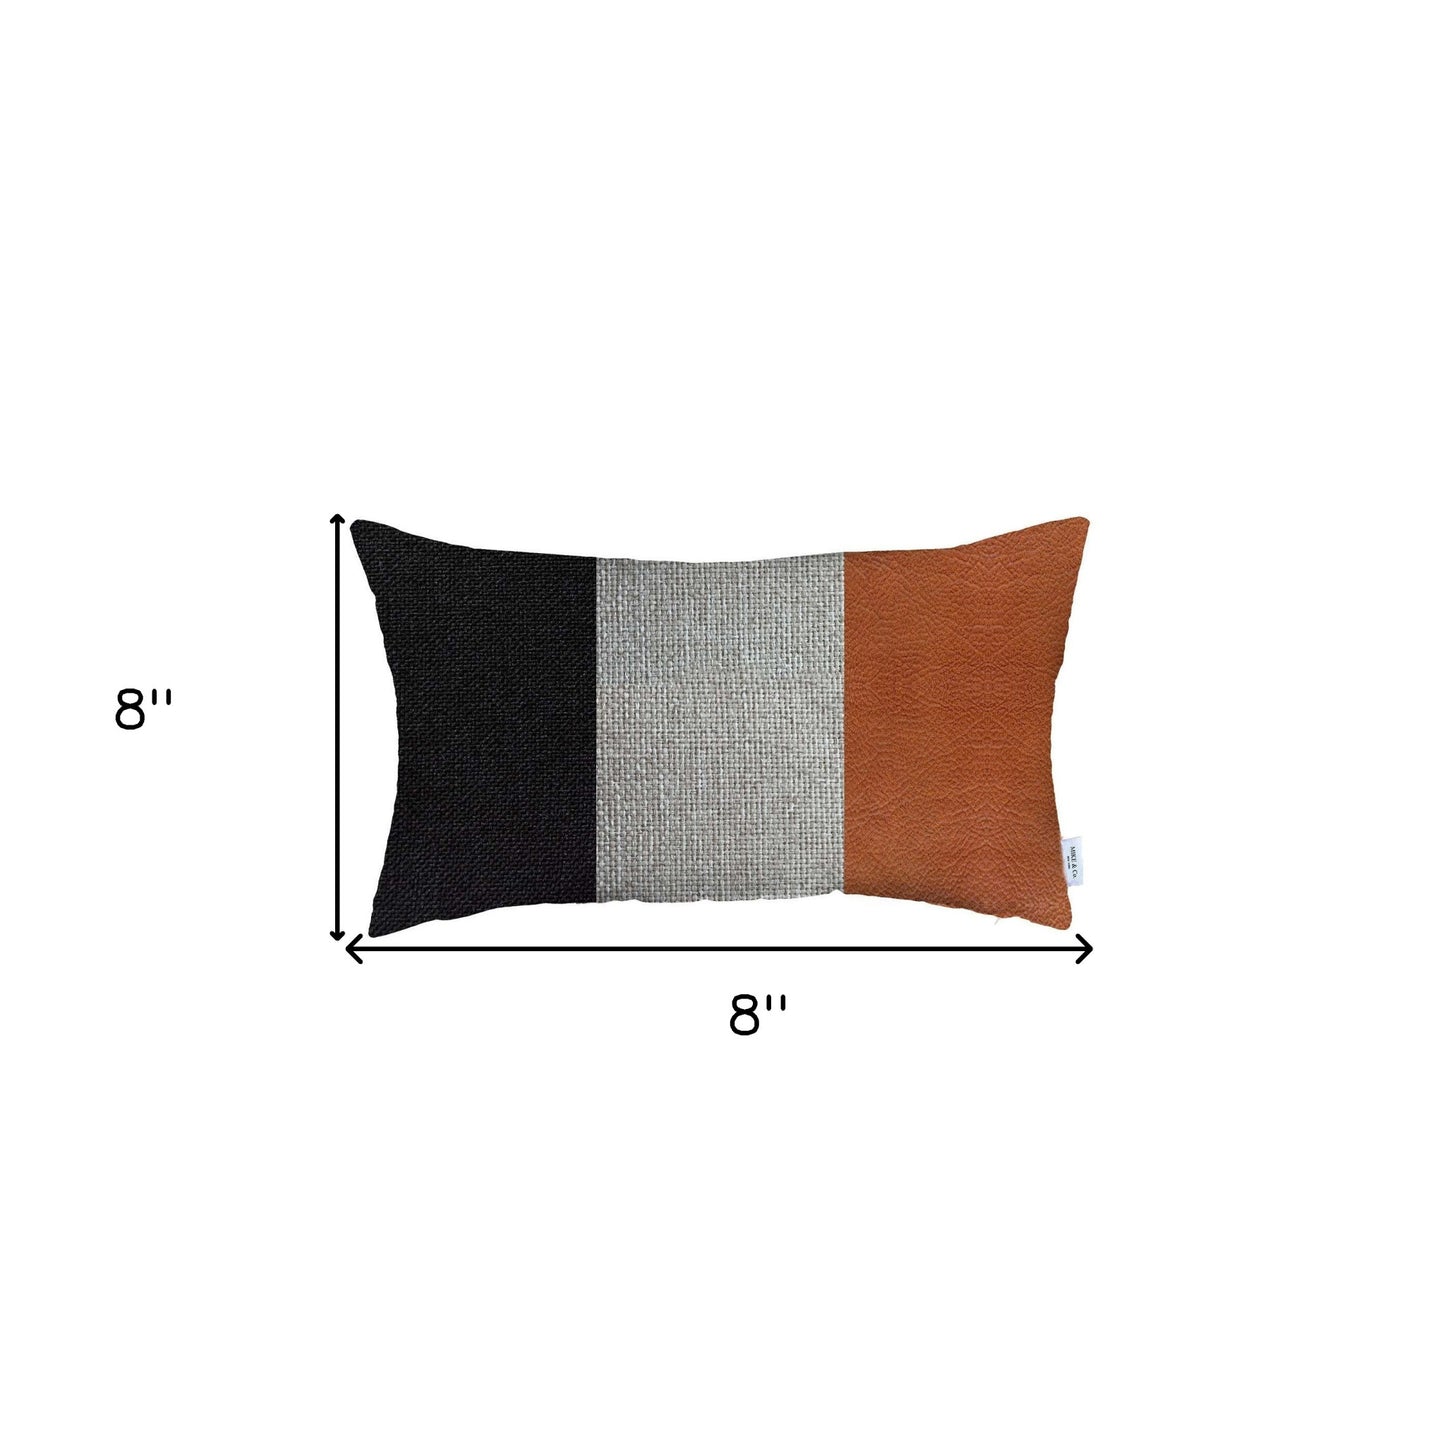 Tricolored Faux Leather Lumbar Throw Pillow